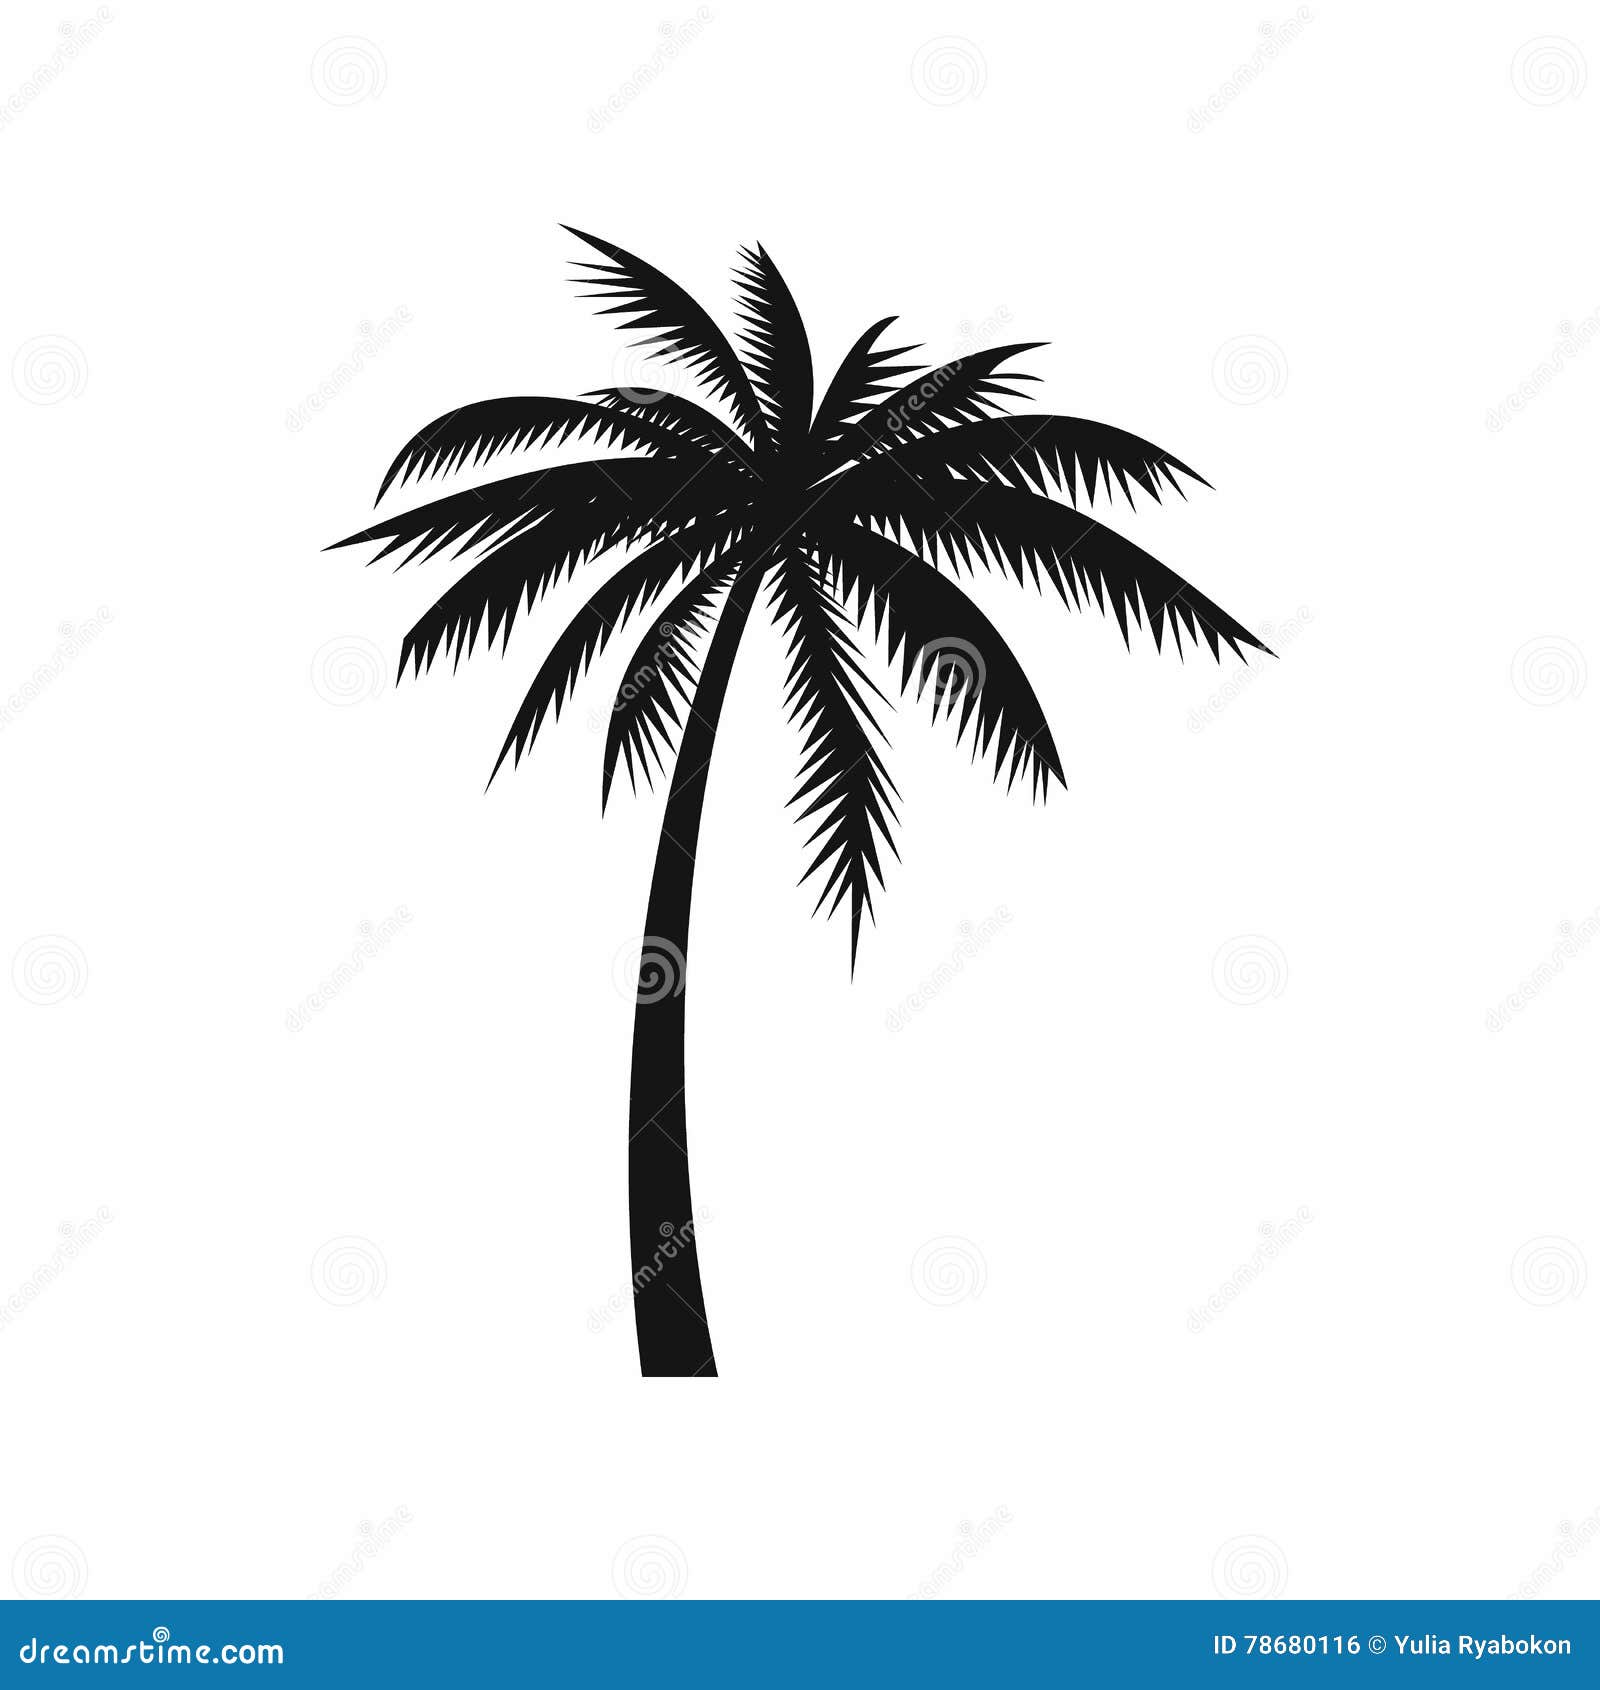 coconut palm tree icon, simple style